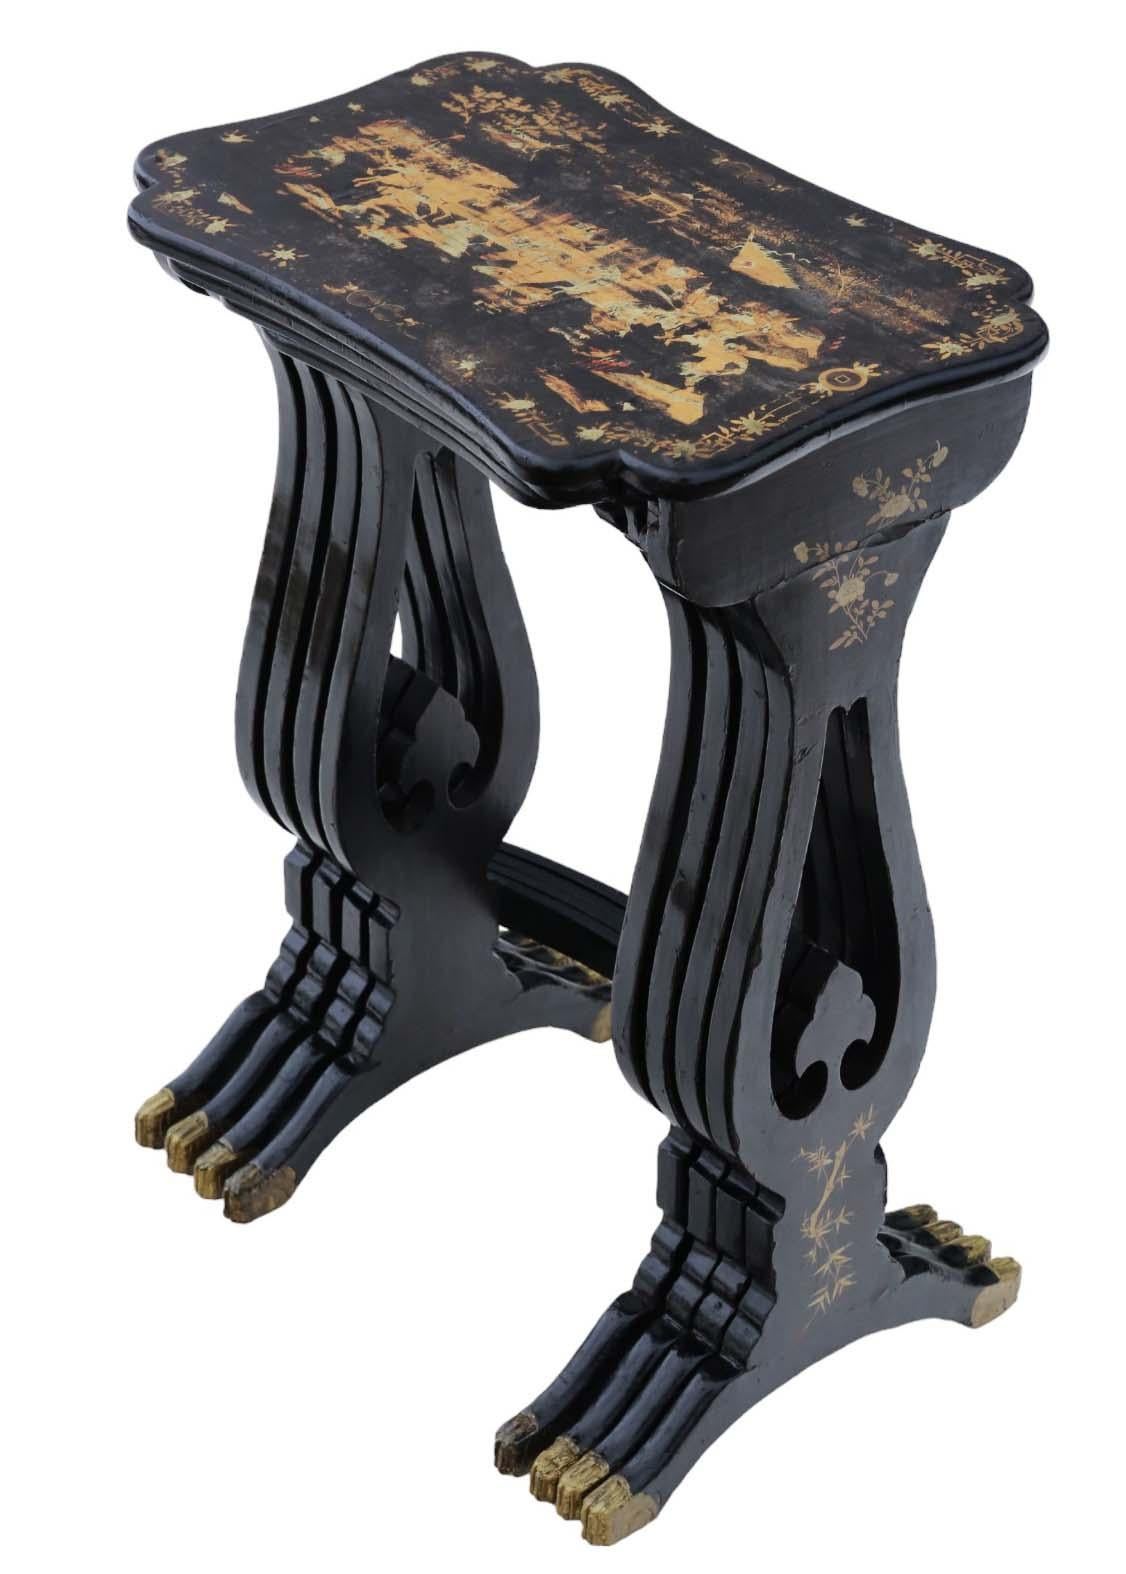 Antique fine quality Chinoiserie Boulle-work black lacquer nest of 4 19th Century tables.
 
Very attractive, with lovely proportions and styling. A rare find.
 
No loose joints or woodworm.
Overall maximum dimensions:

50cmW x 34cmD x 70cm high,